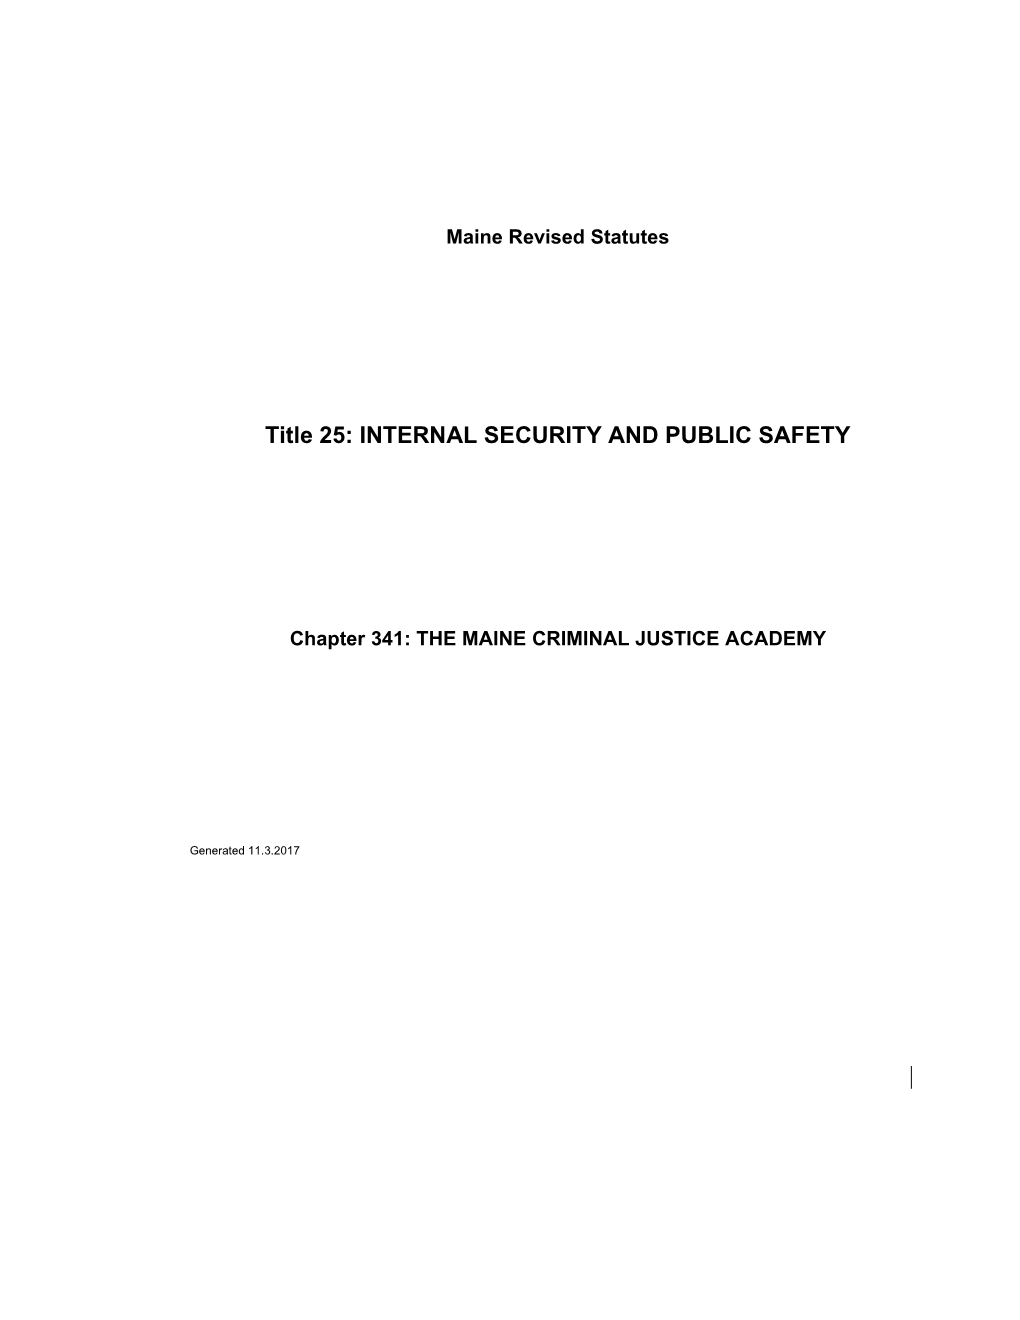 MRS Title 25 2803-A. POWERS and DUTIES of the BOARD of TRUSTEES